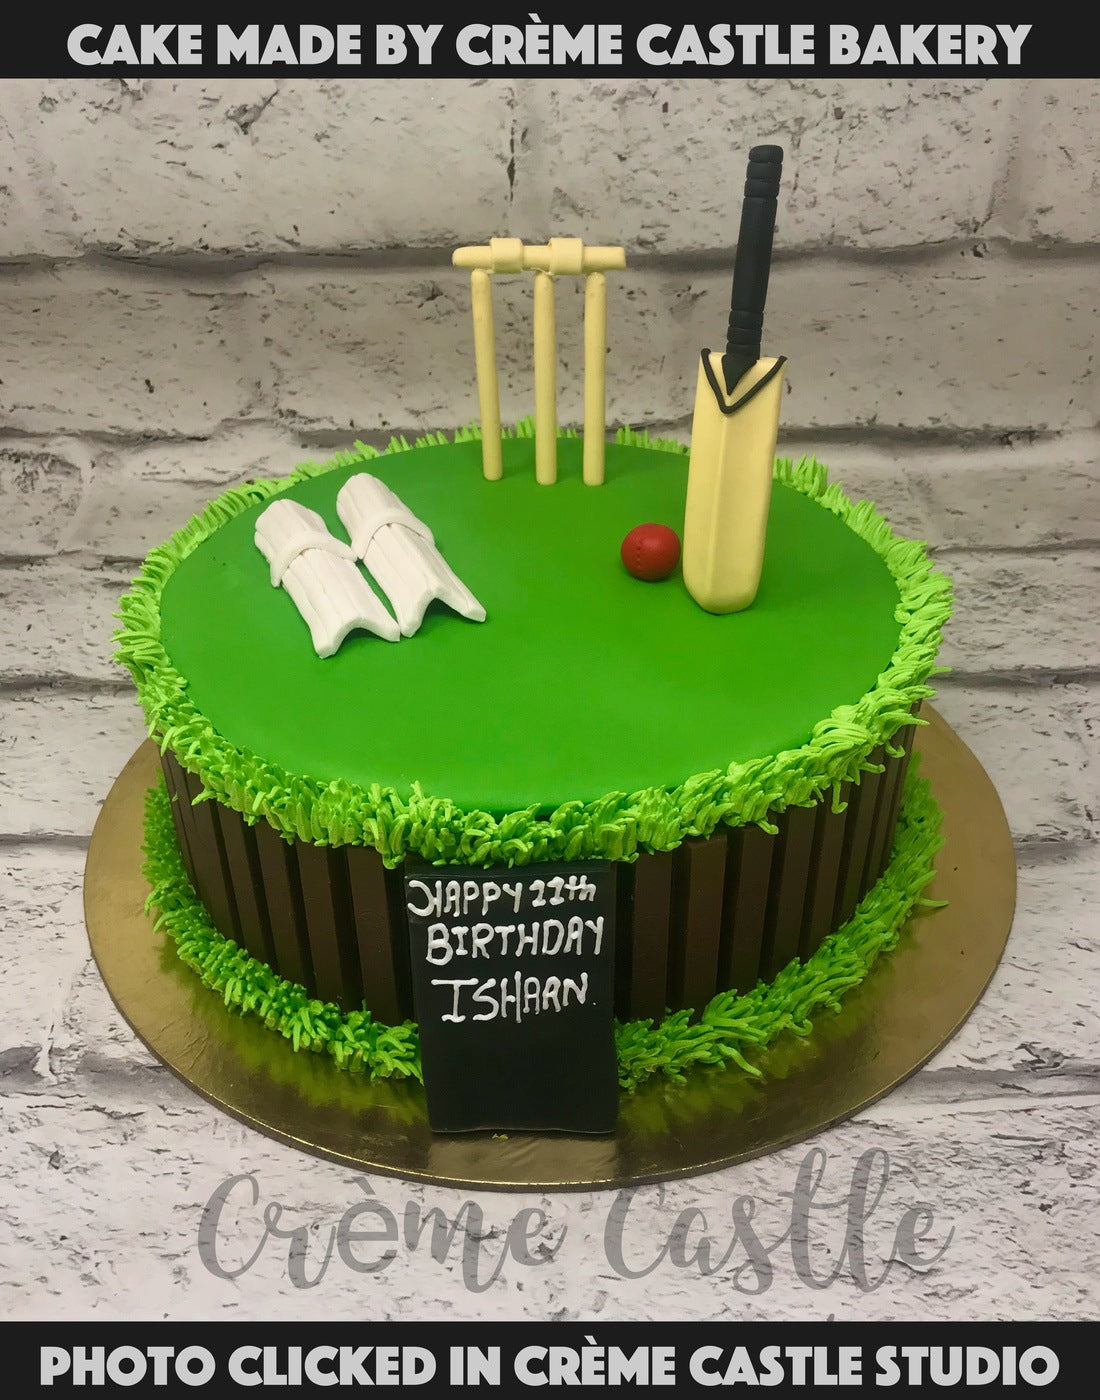 Cricket Cake with Pitch by Creme Castle